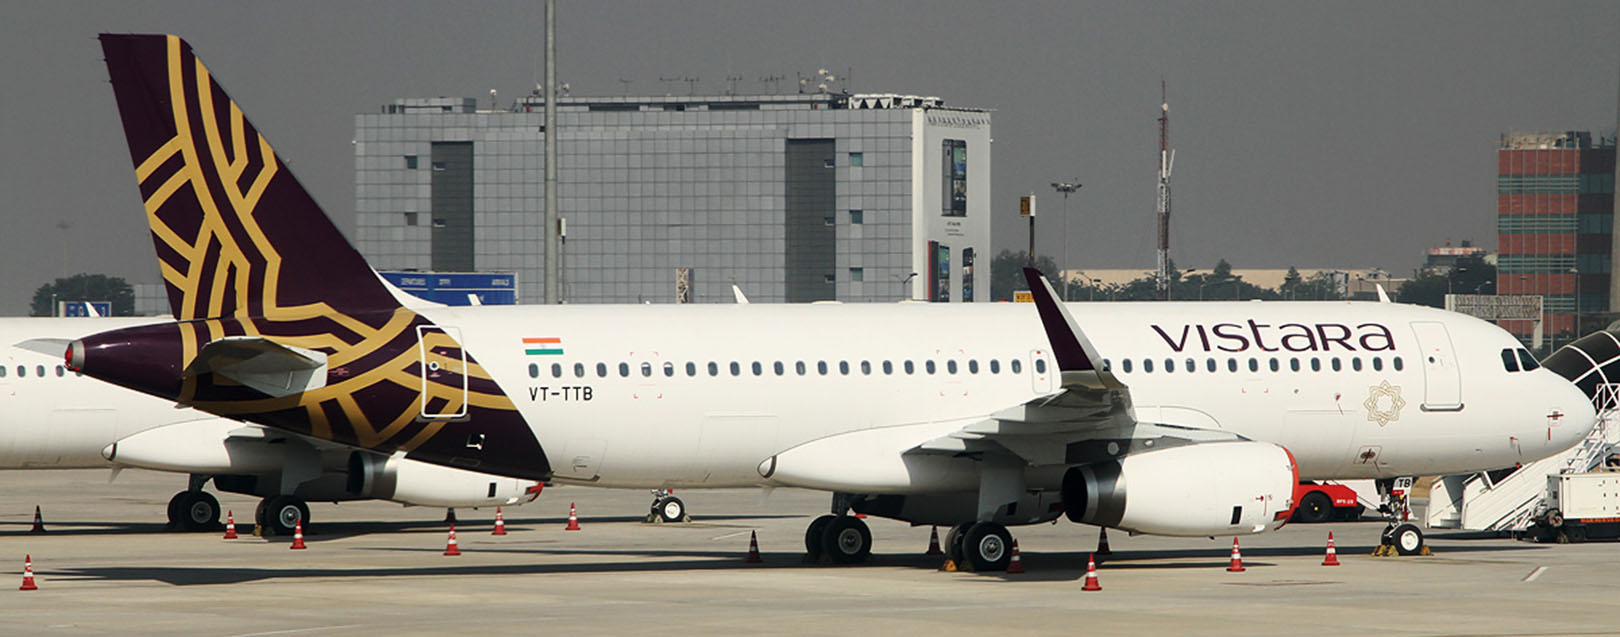 Vistara plans 500 flights a week to 18 routes by year-end